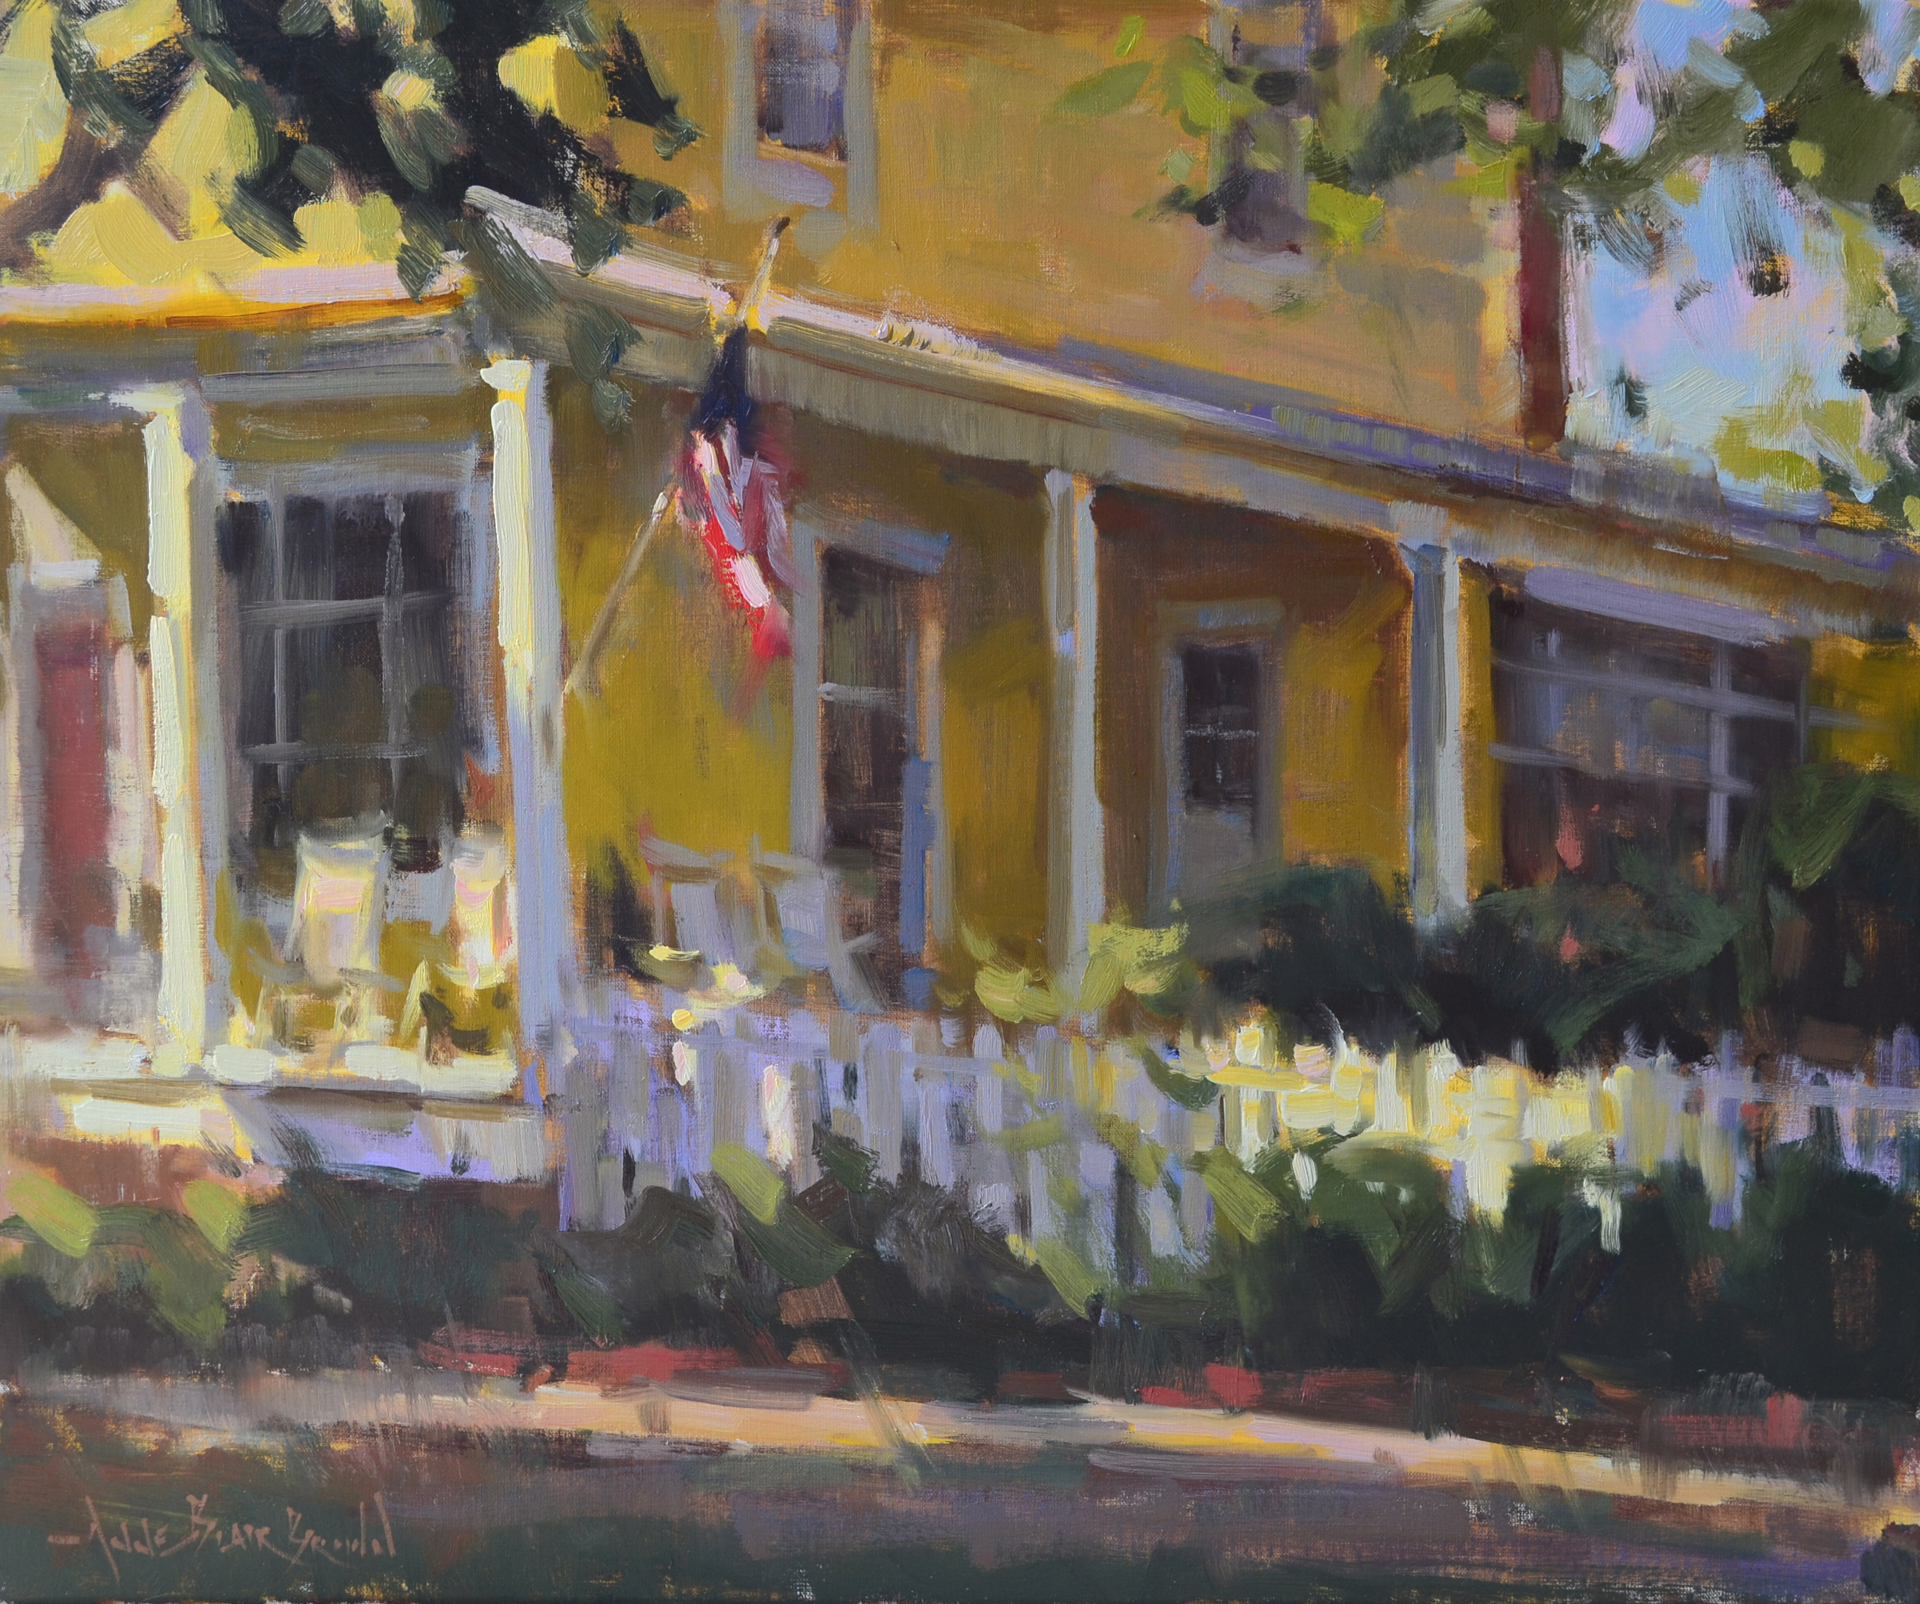 Southern Morning by Anne Blair Brown, AIS Master